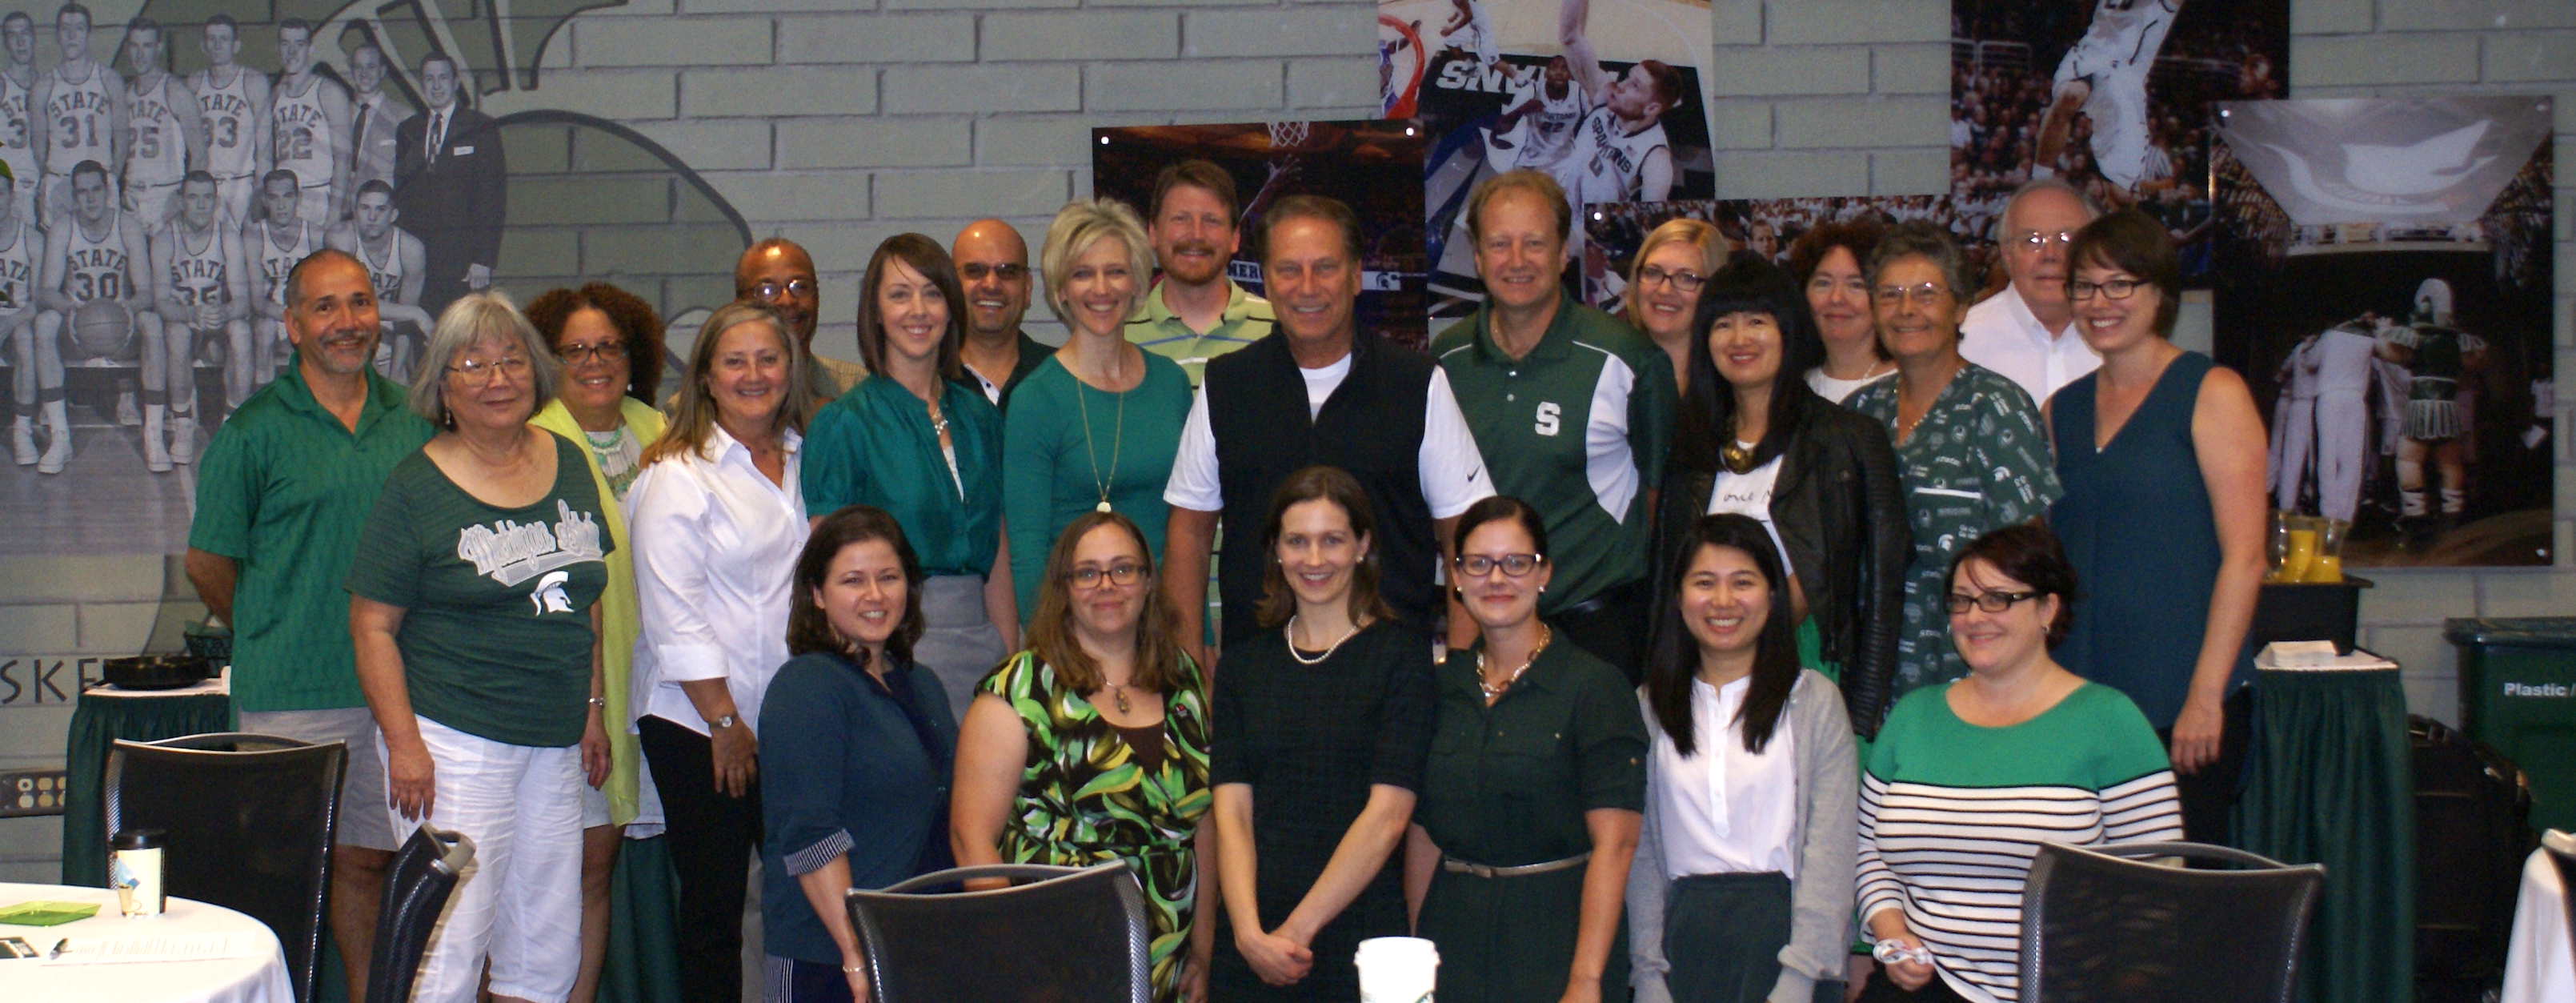 HDFS Faculty and Staff with Coach Tom Izzo